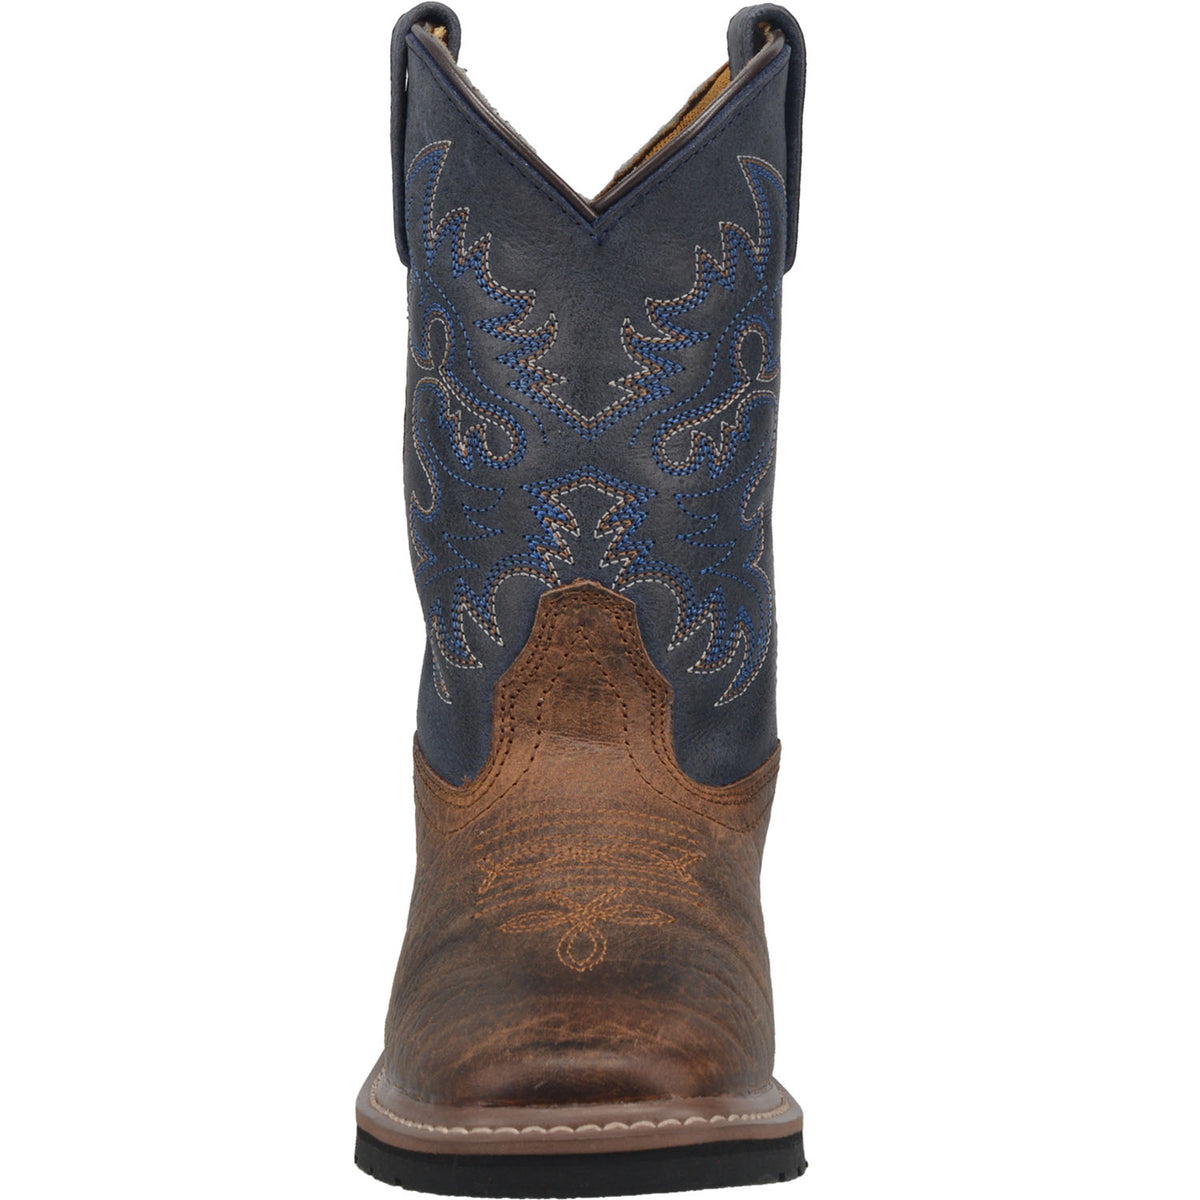 BRANTLEY LEATHER CHILDREN'S BOOT Cover